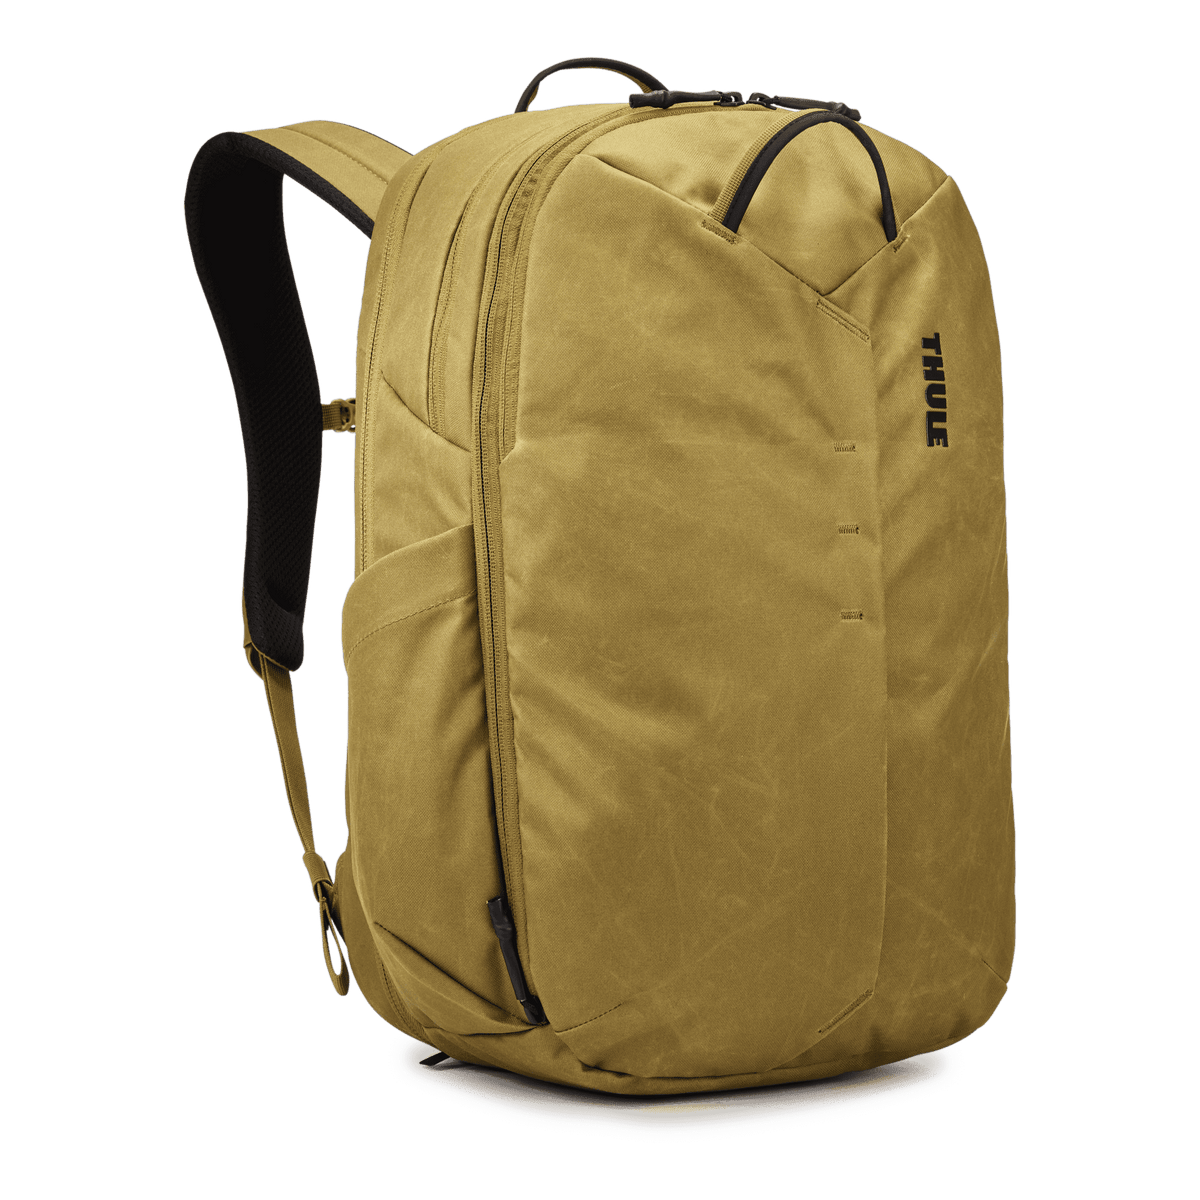 Thule EnRoute backpack 23L – Altman Luggage